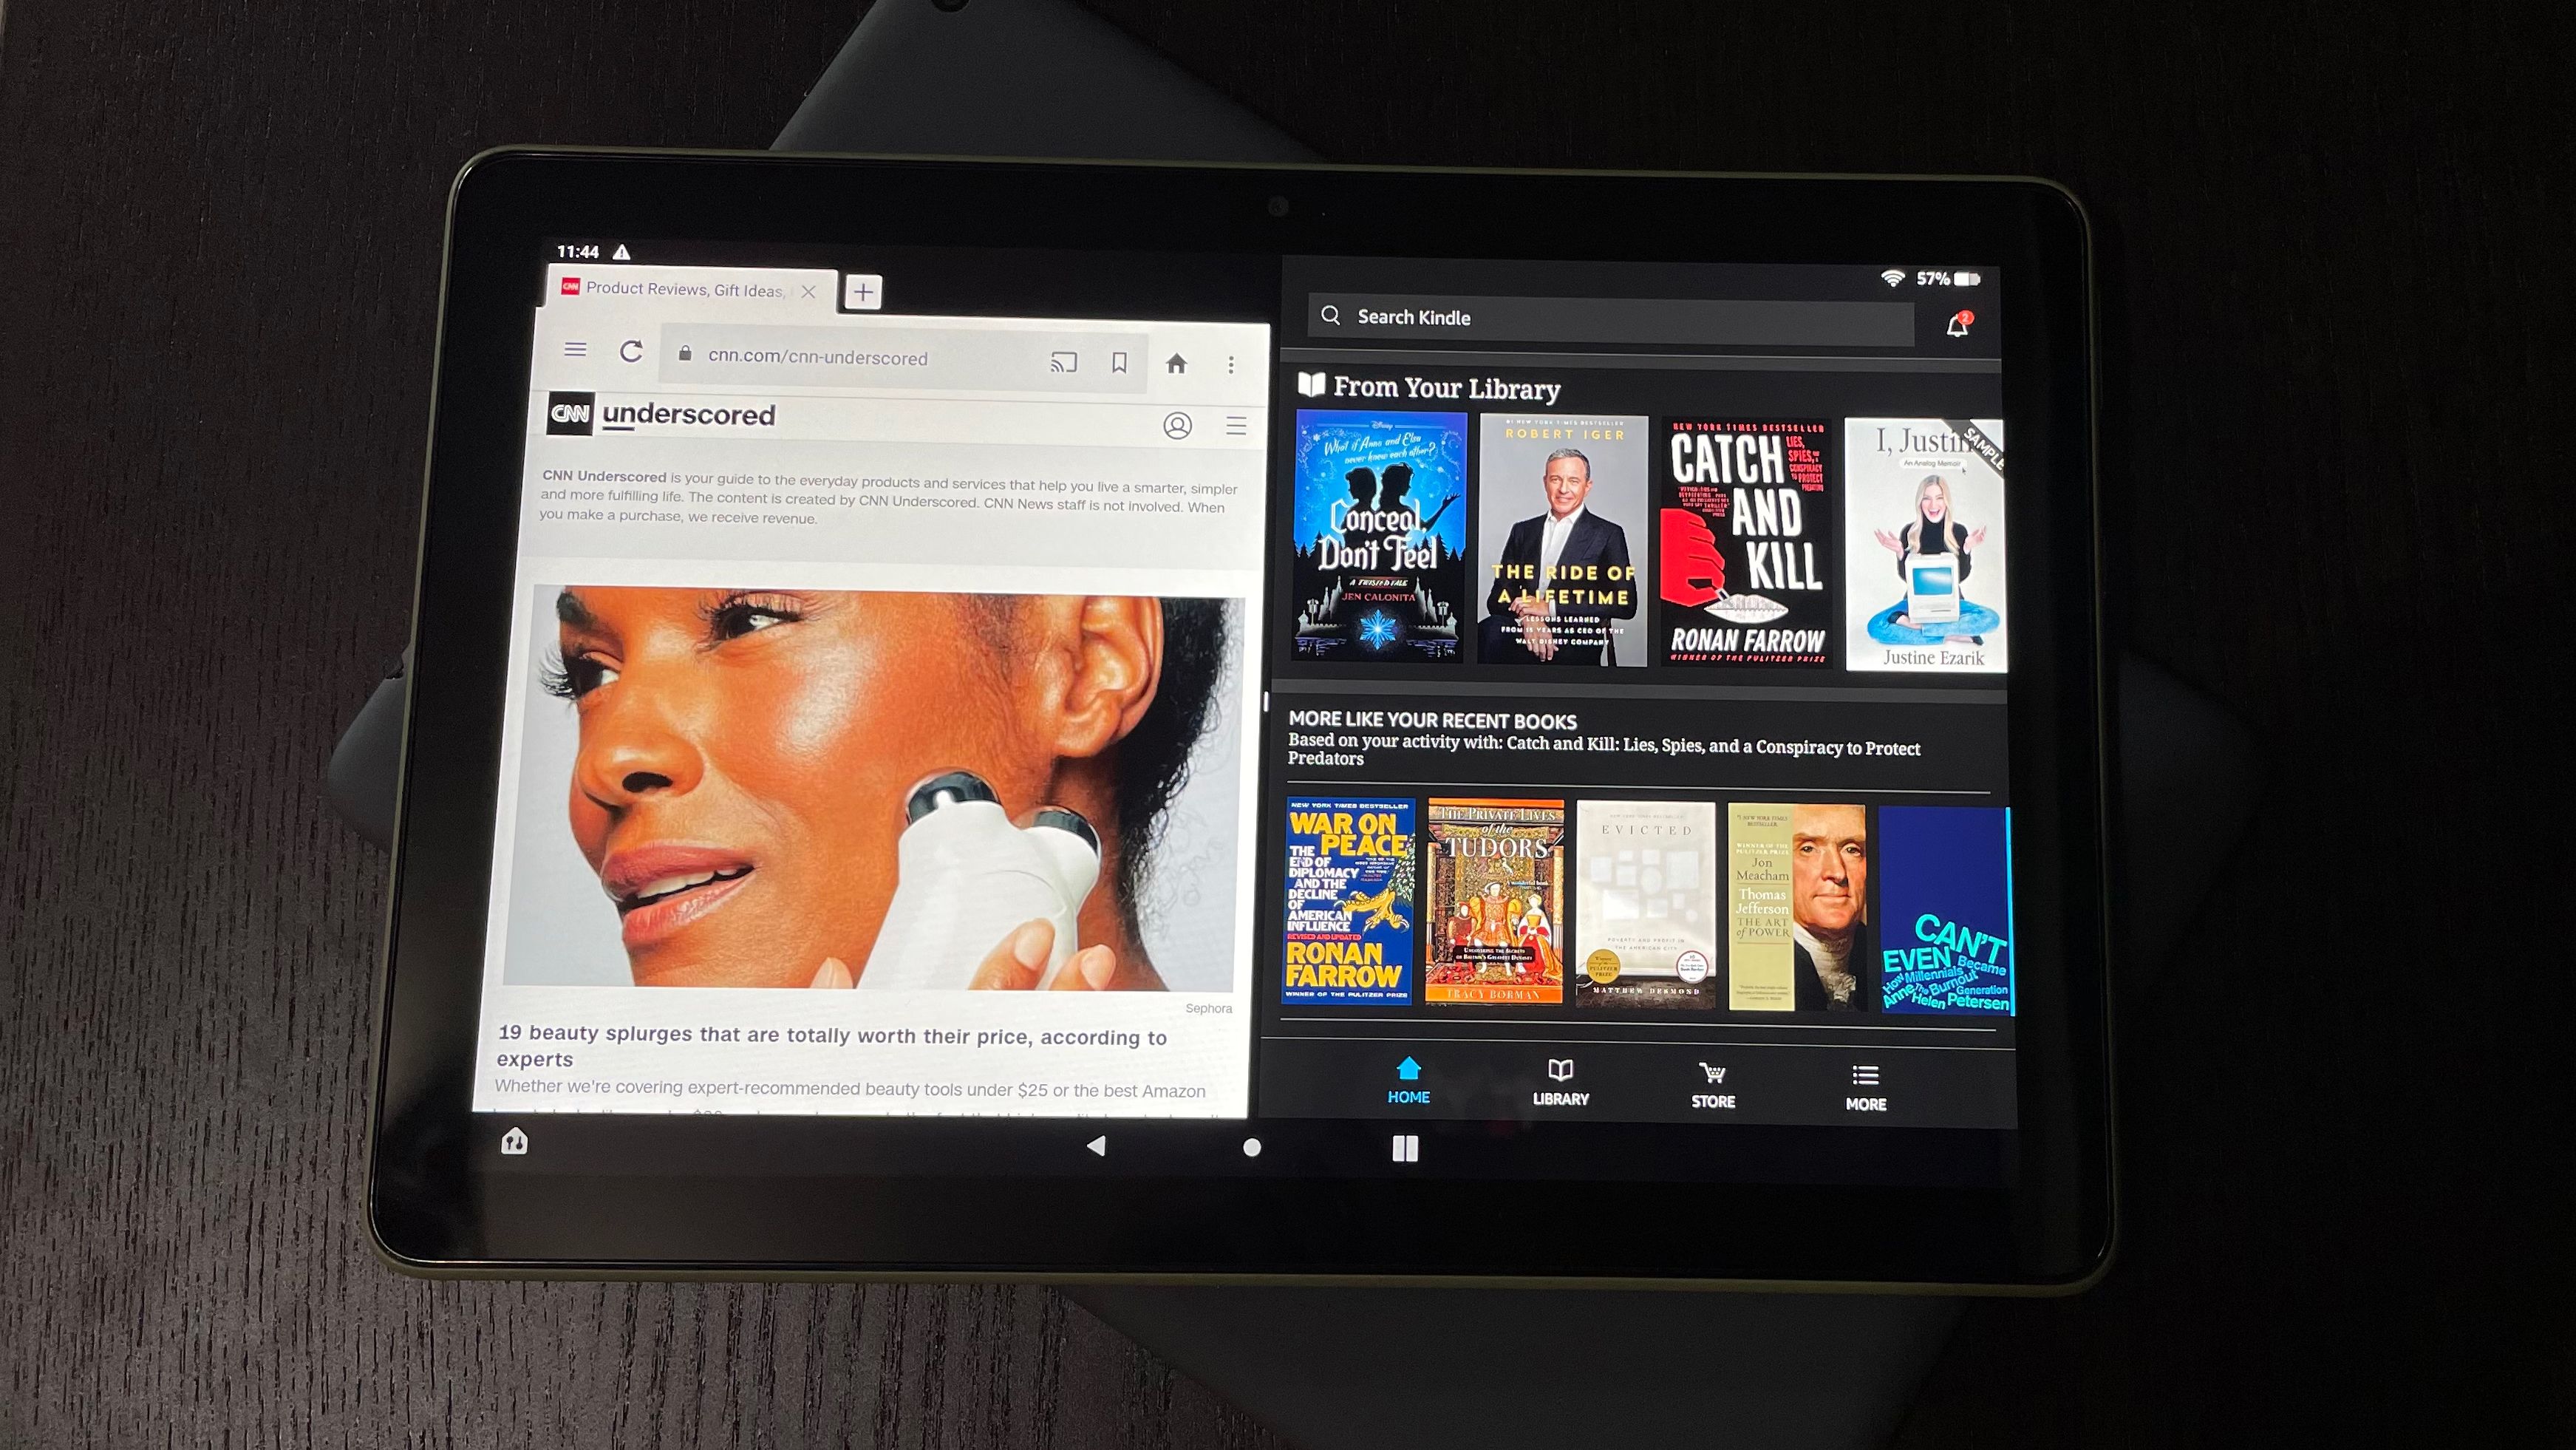 Fire HD 10 Review: A Multimedia Tablet Made for the Whole Family